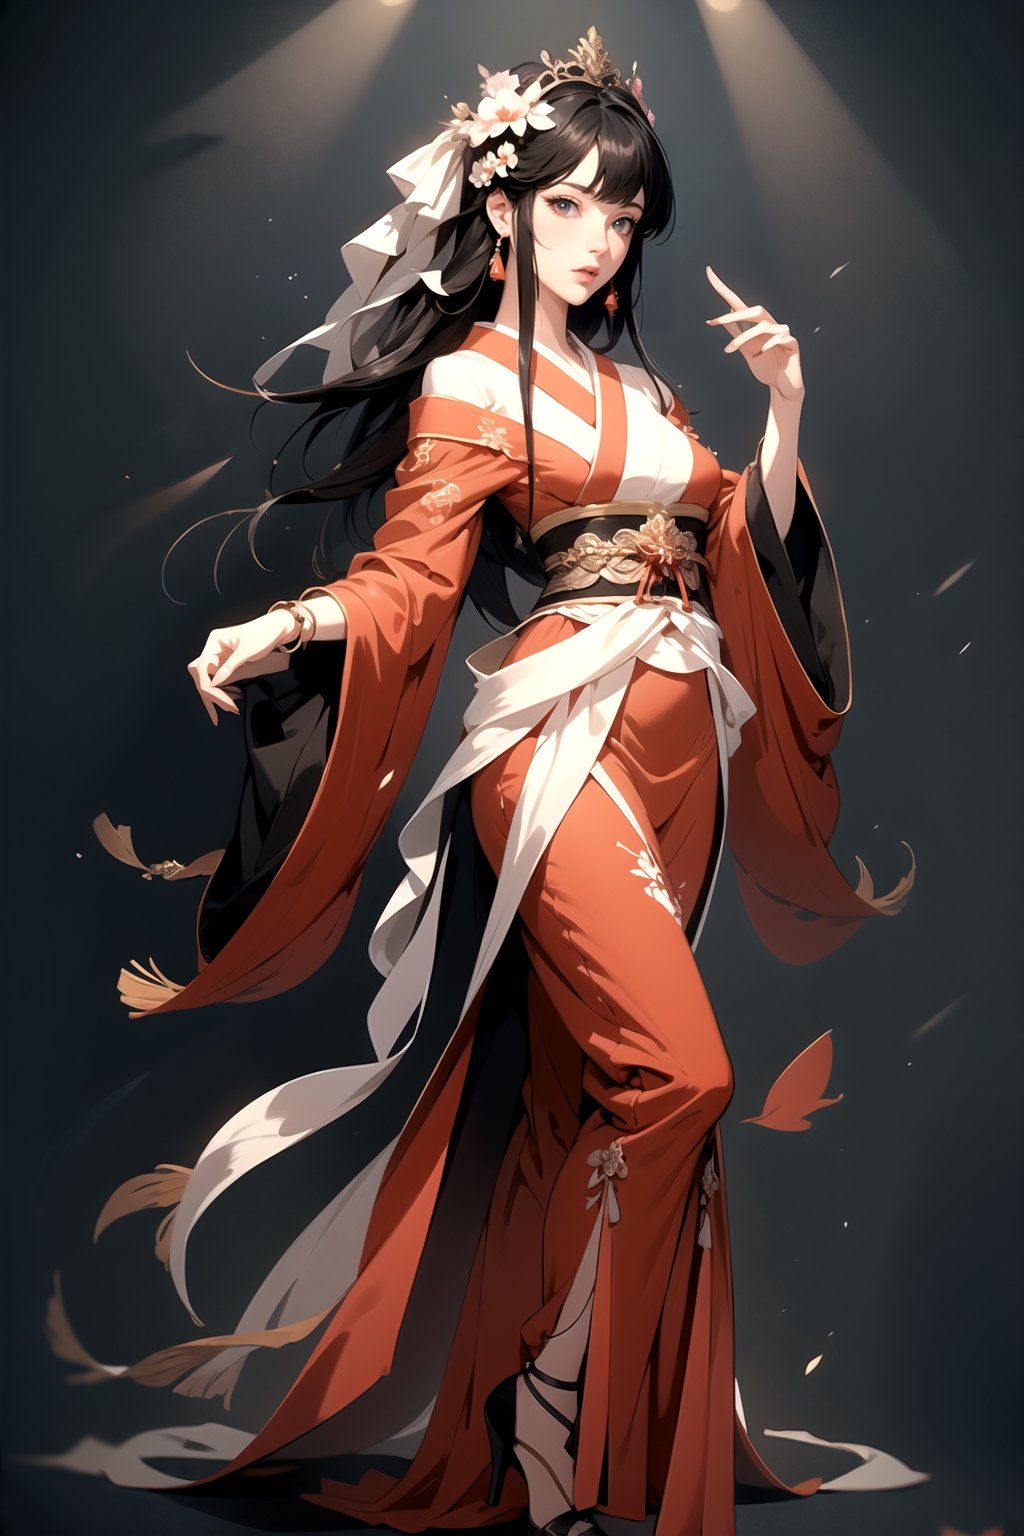 (Masterpiece), (Best Quality: 1.0), (Ultra High Definition: 1.0), Detailed description, 8K, gray background, standing pose, full body, Japanese cartoon, 1 girl, beautiful Japanese cartoon girl, Wearing red dress, flower crown, pretty face, detailed face, beautiful eyes, detailed eyes, bright red lips, red lipstick, beautiful stylish hair, highlights in hair, bangs japanese cartoon style, best quality,illustration,Perfectly detailed fingers, the right number of fingers,